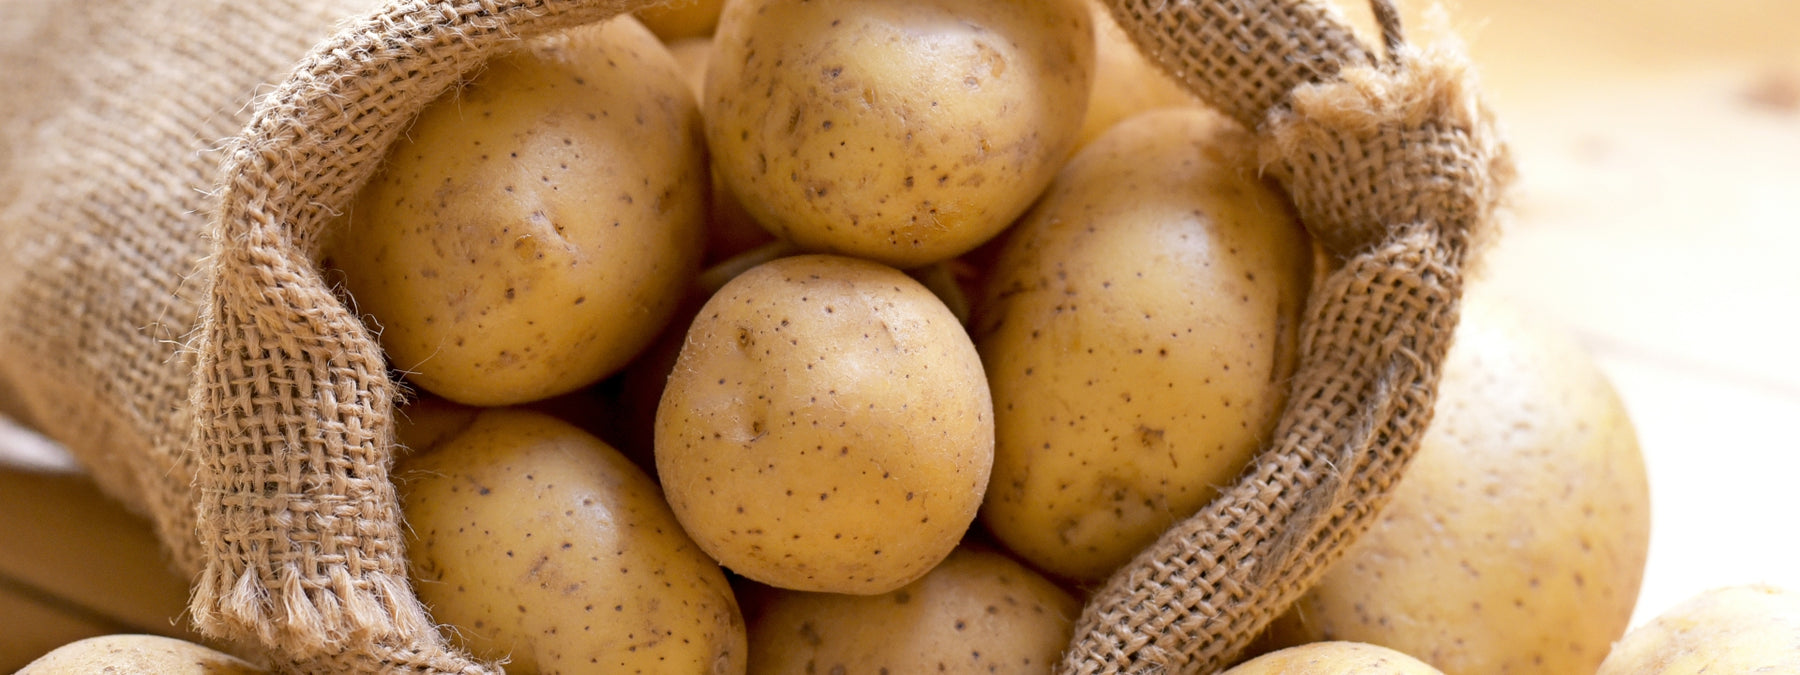 Can You Really Lose Weight Eating Potatoes?